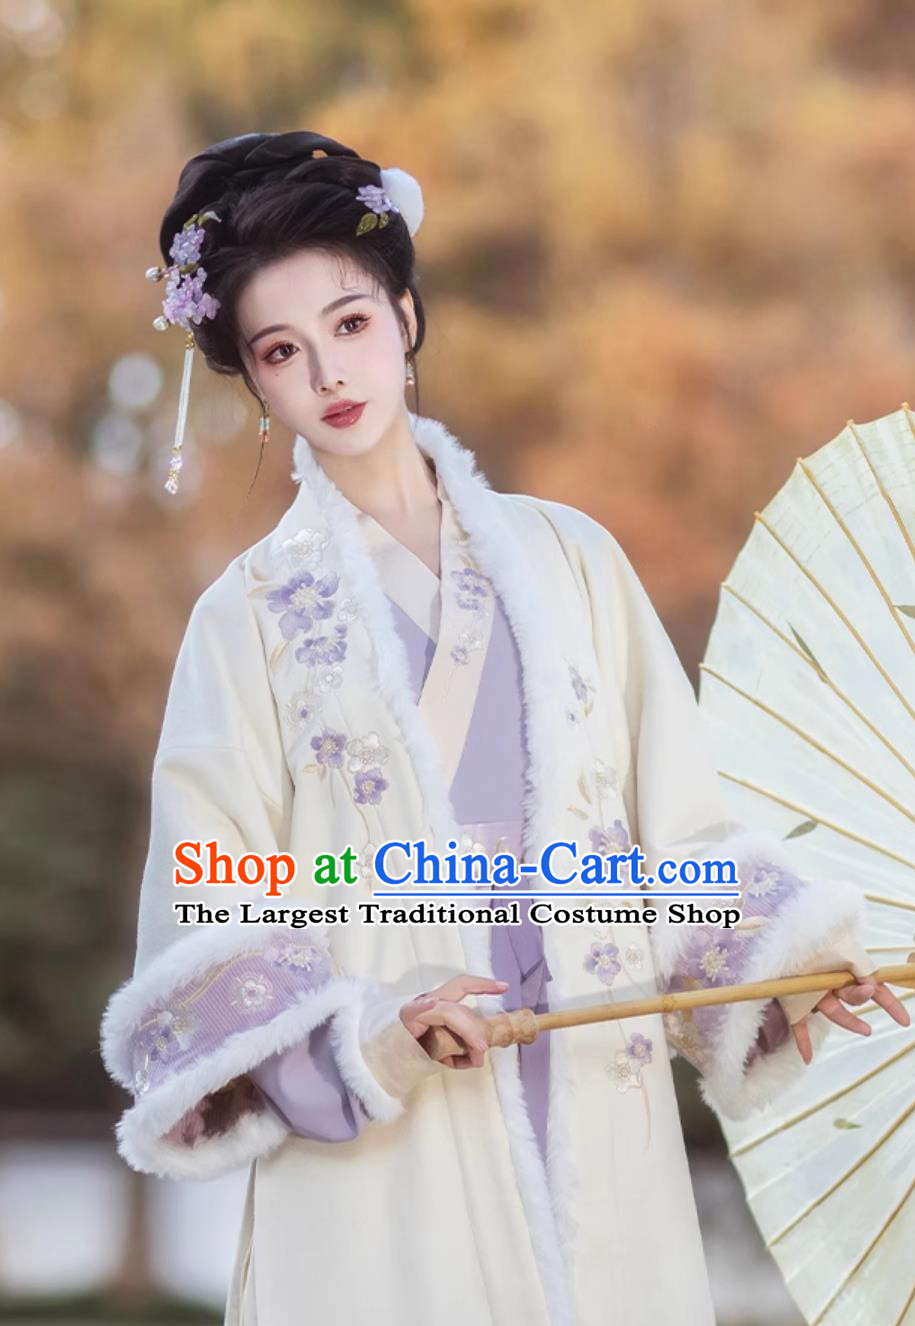 Traditional Song Dynasty Young Woman Costumes Online Buy Hanfu Ancient Chinese Noble Female Winter Clothing